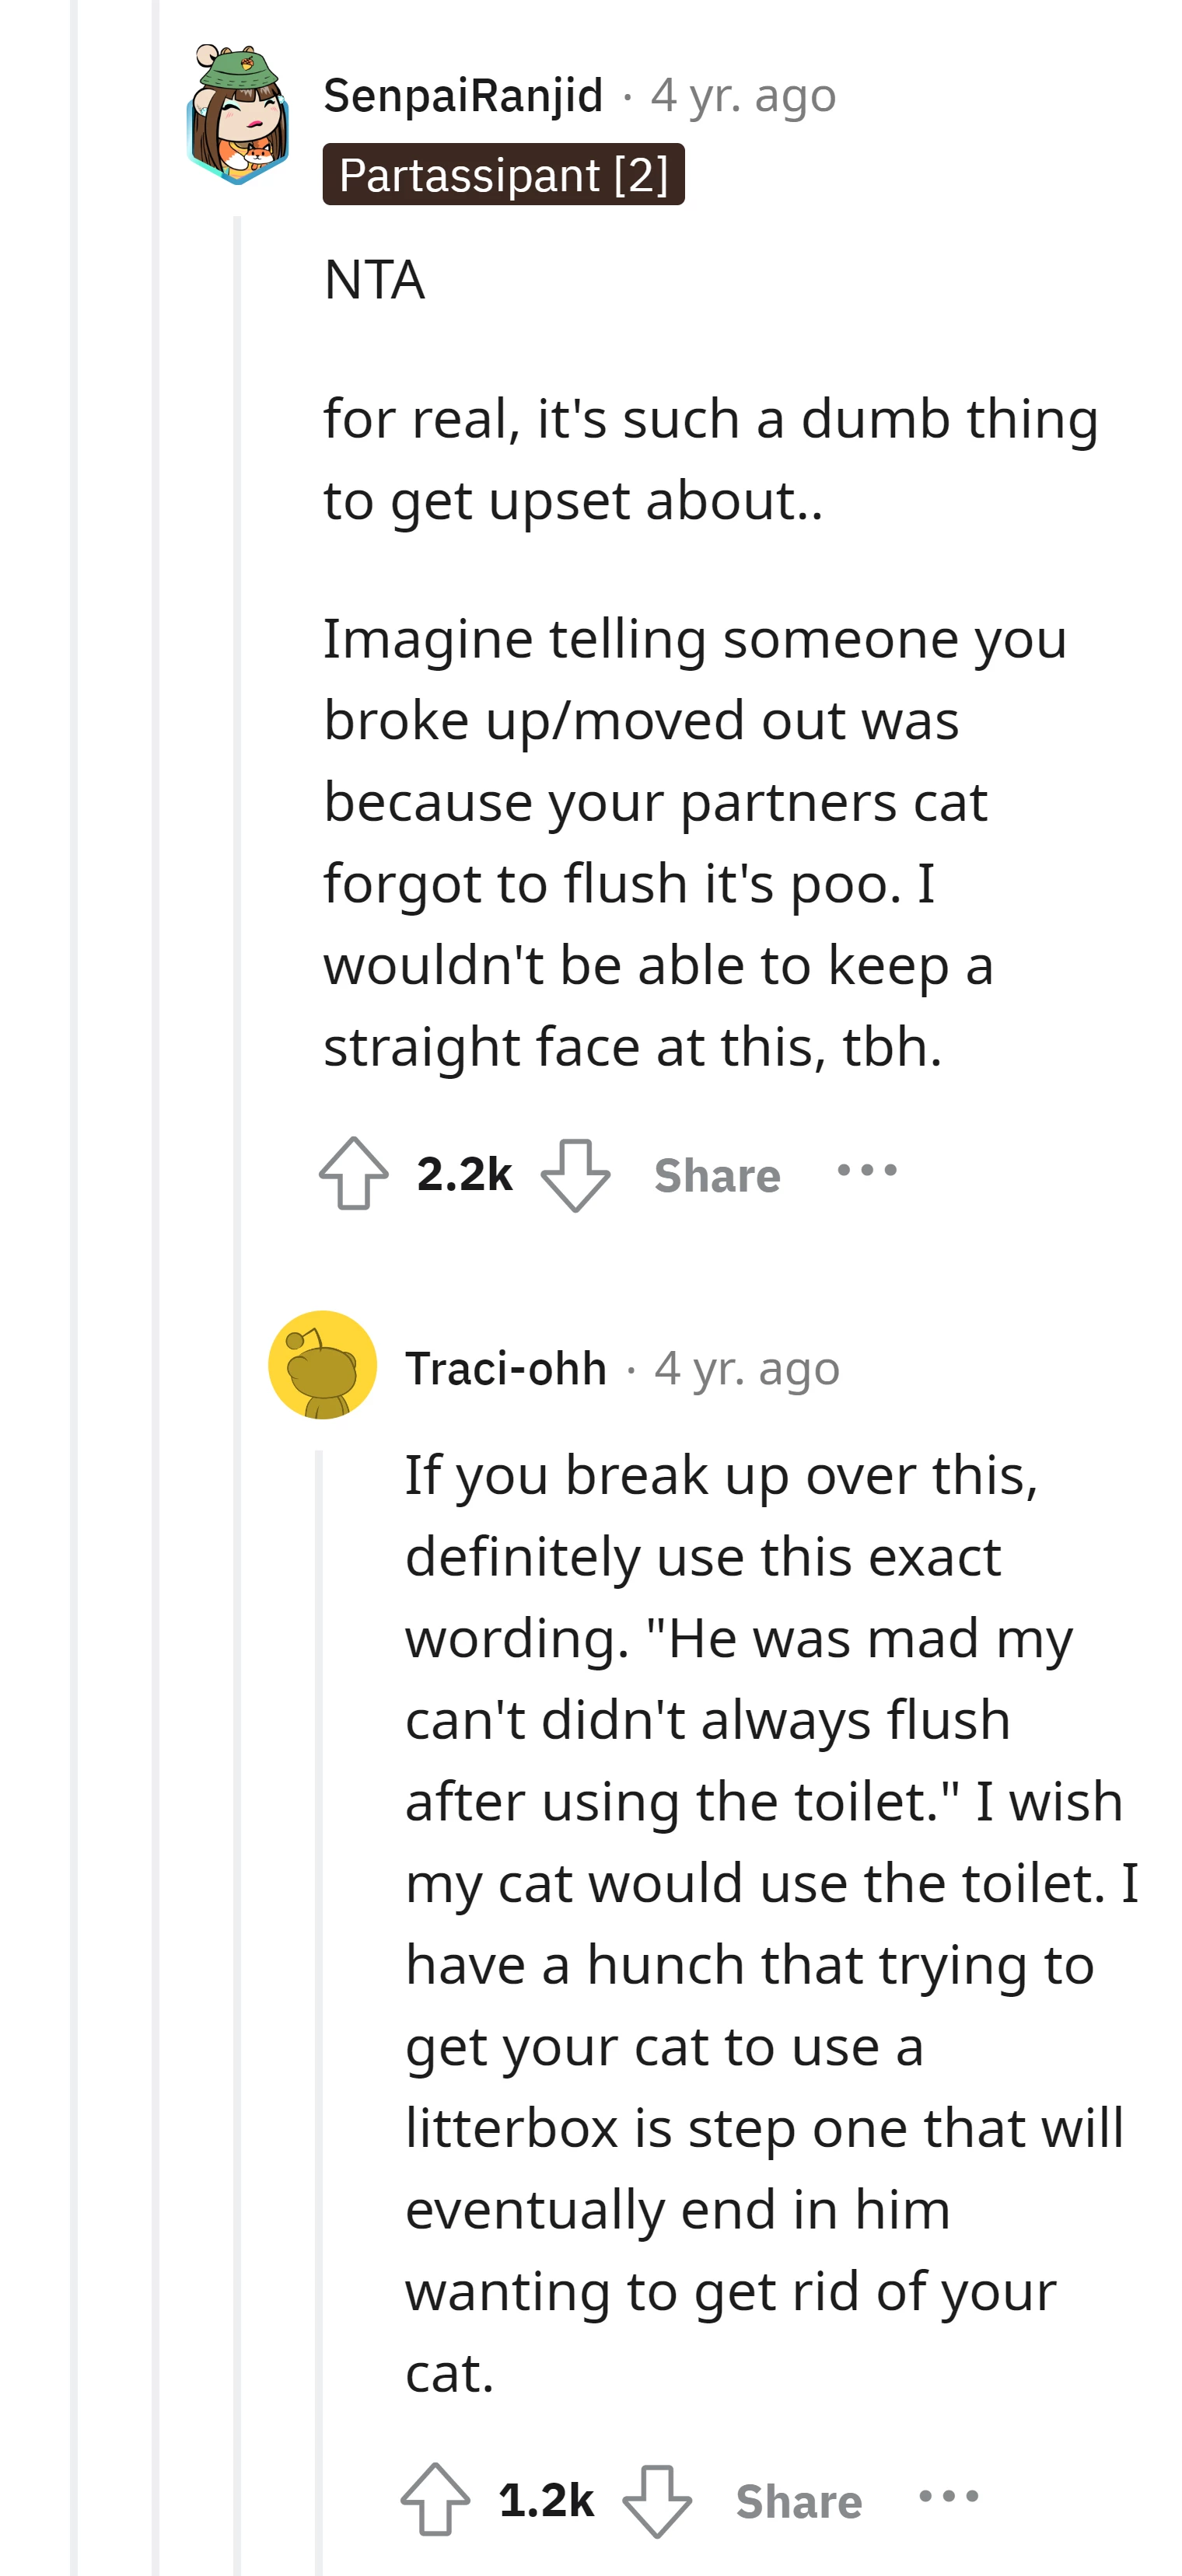 It's absurd and humorous that someone would get upset over a cat not flushing